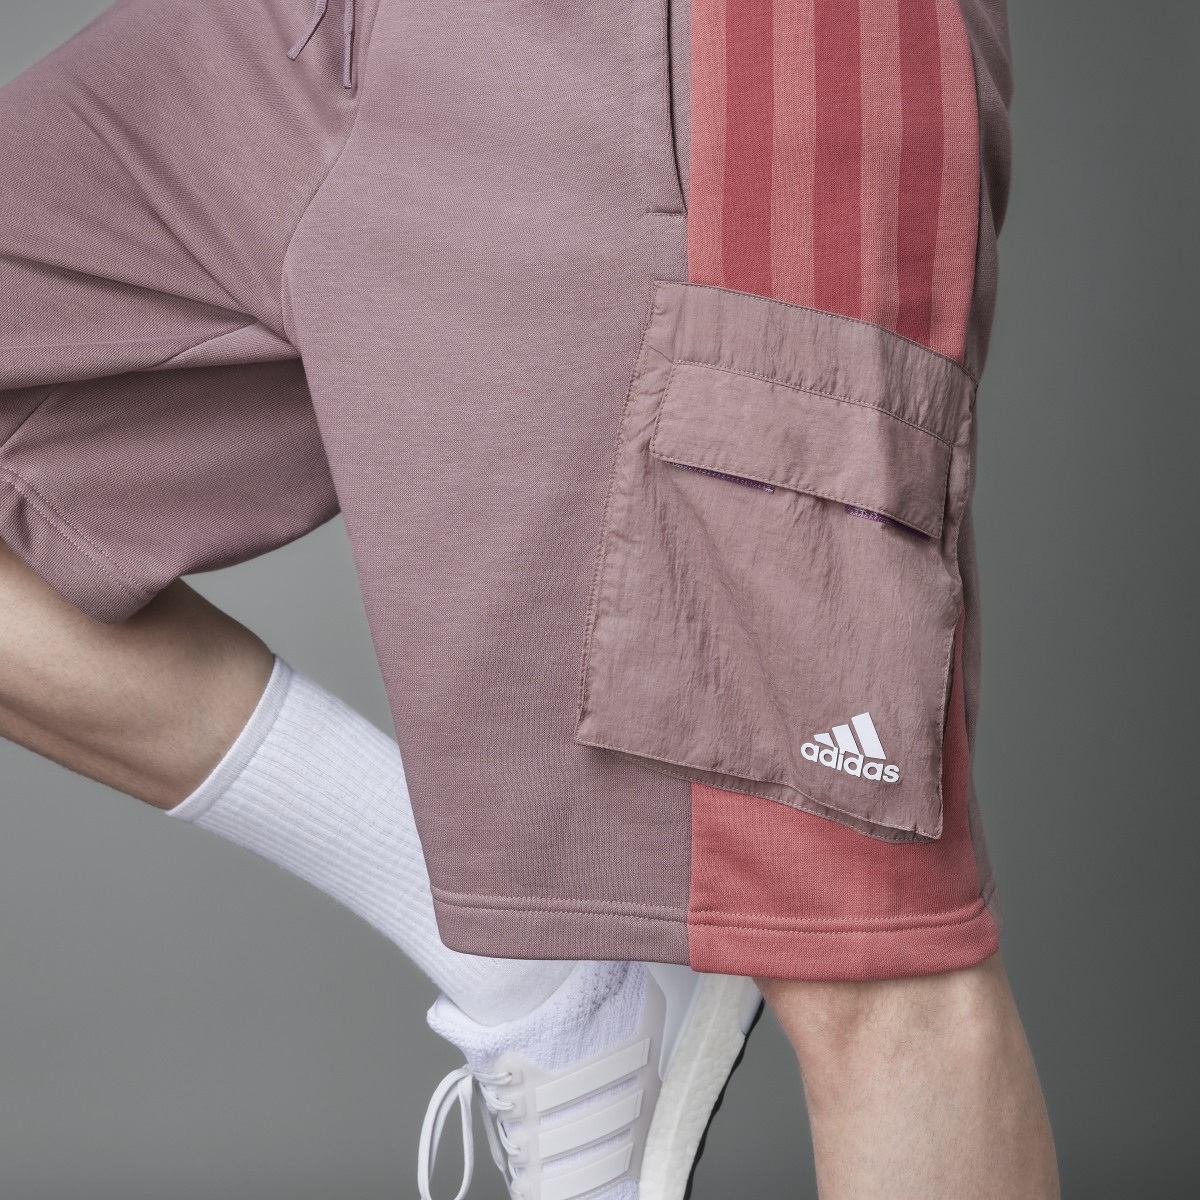 Adidas Colorblock French Terry Shorts. 5